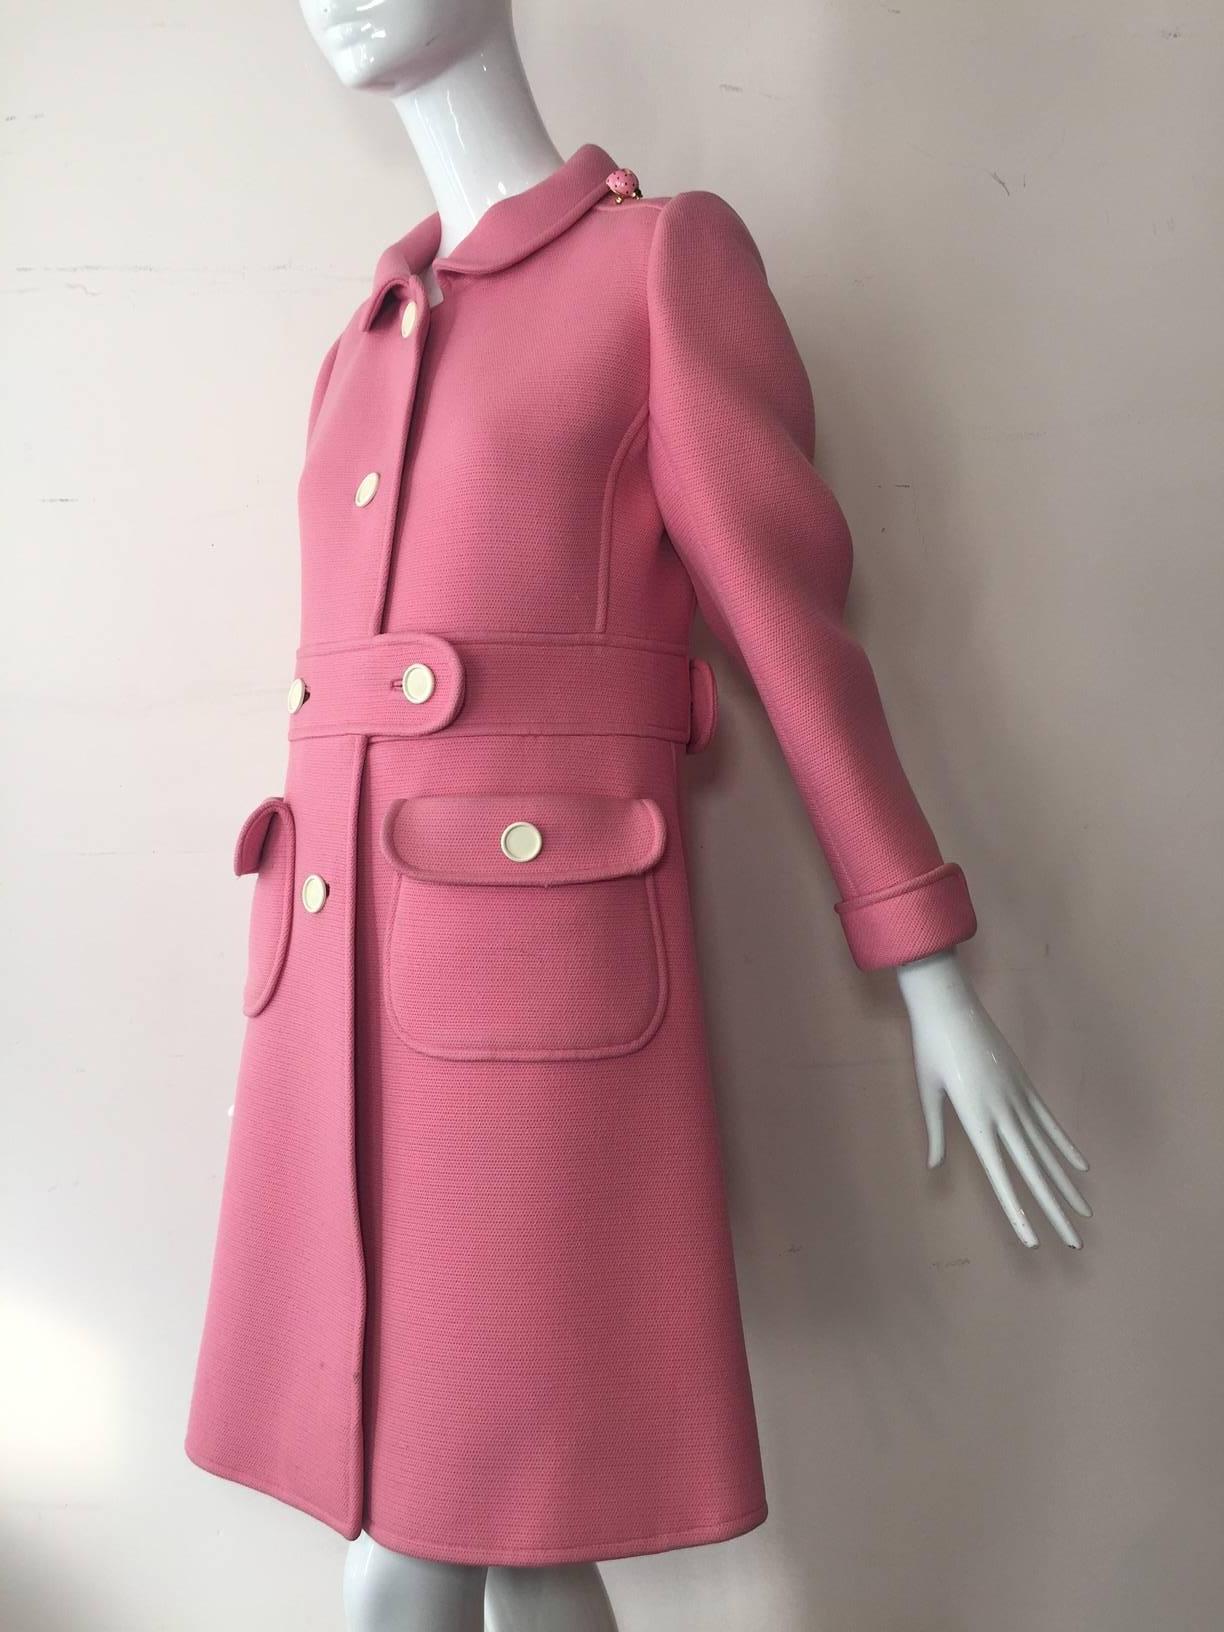 A fabulous 1960s Courreges pink wool, Mod styled coat with Peter Pan collar, military-inspired design and white buttons.  Fully lined with back belt and flap pockets. 